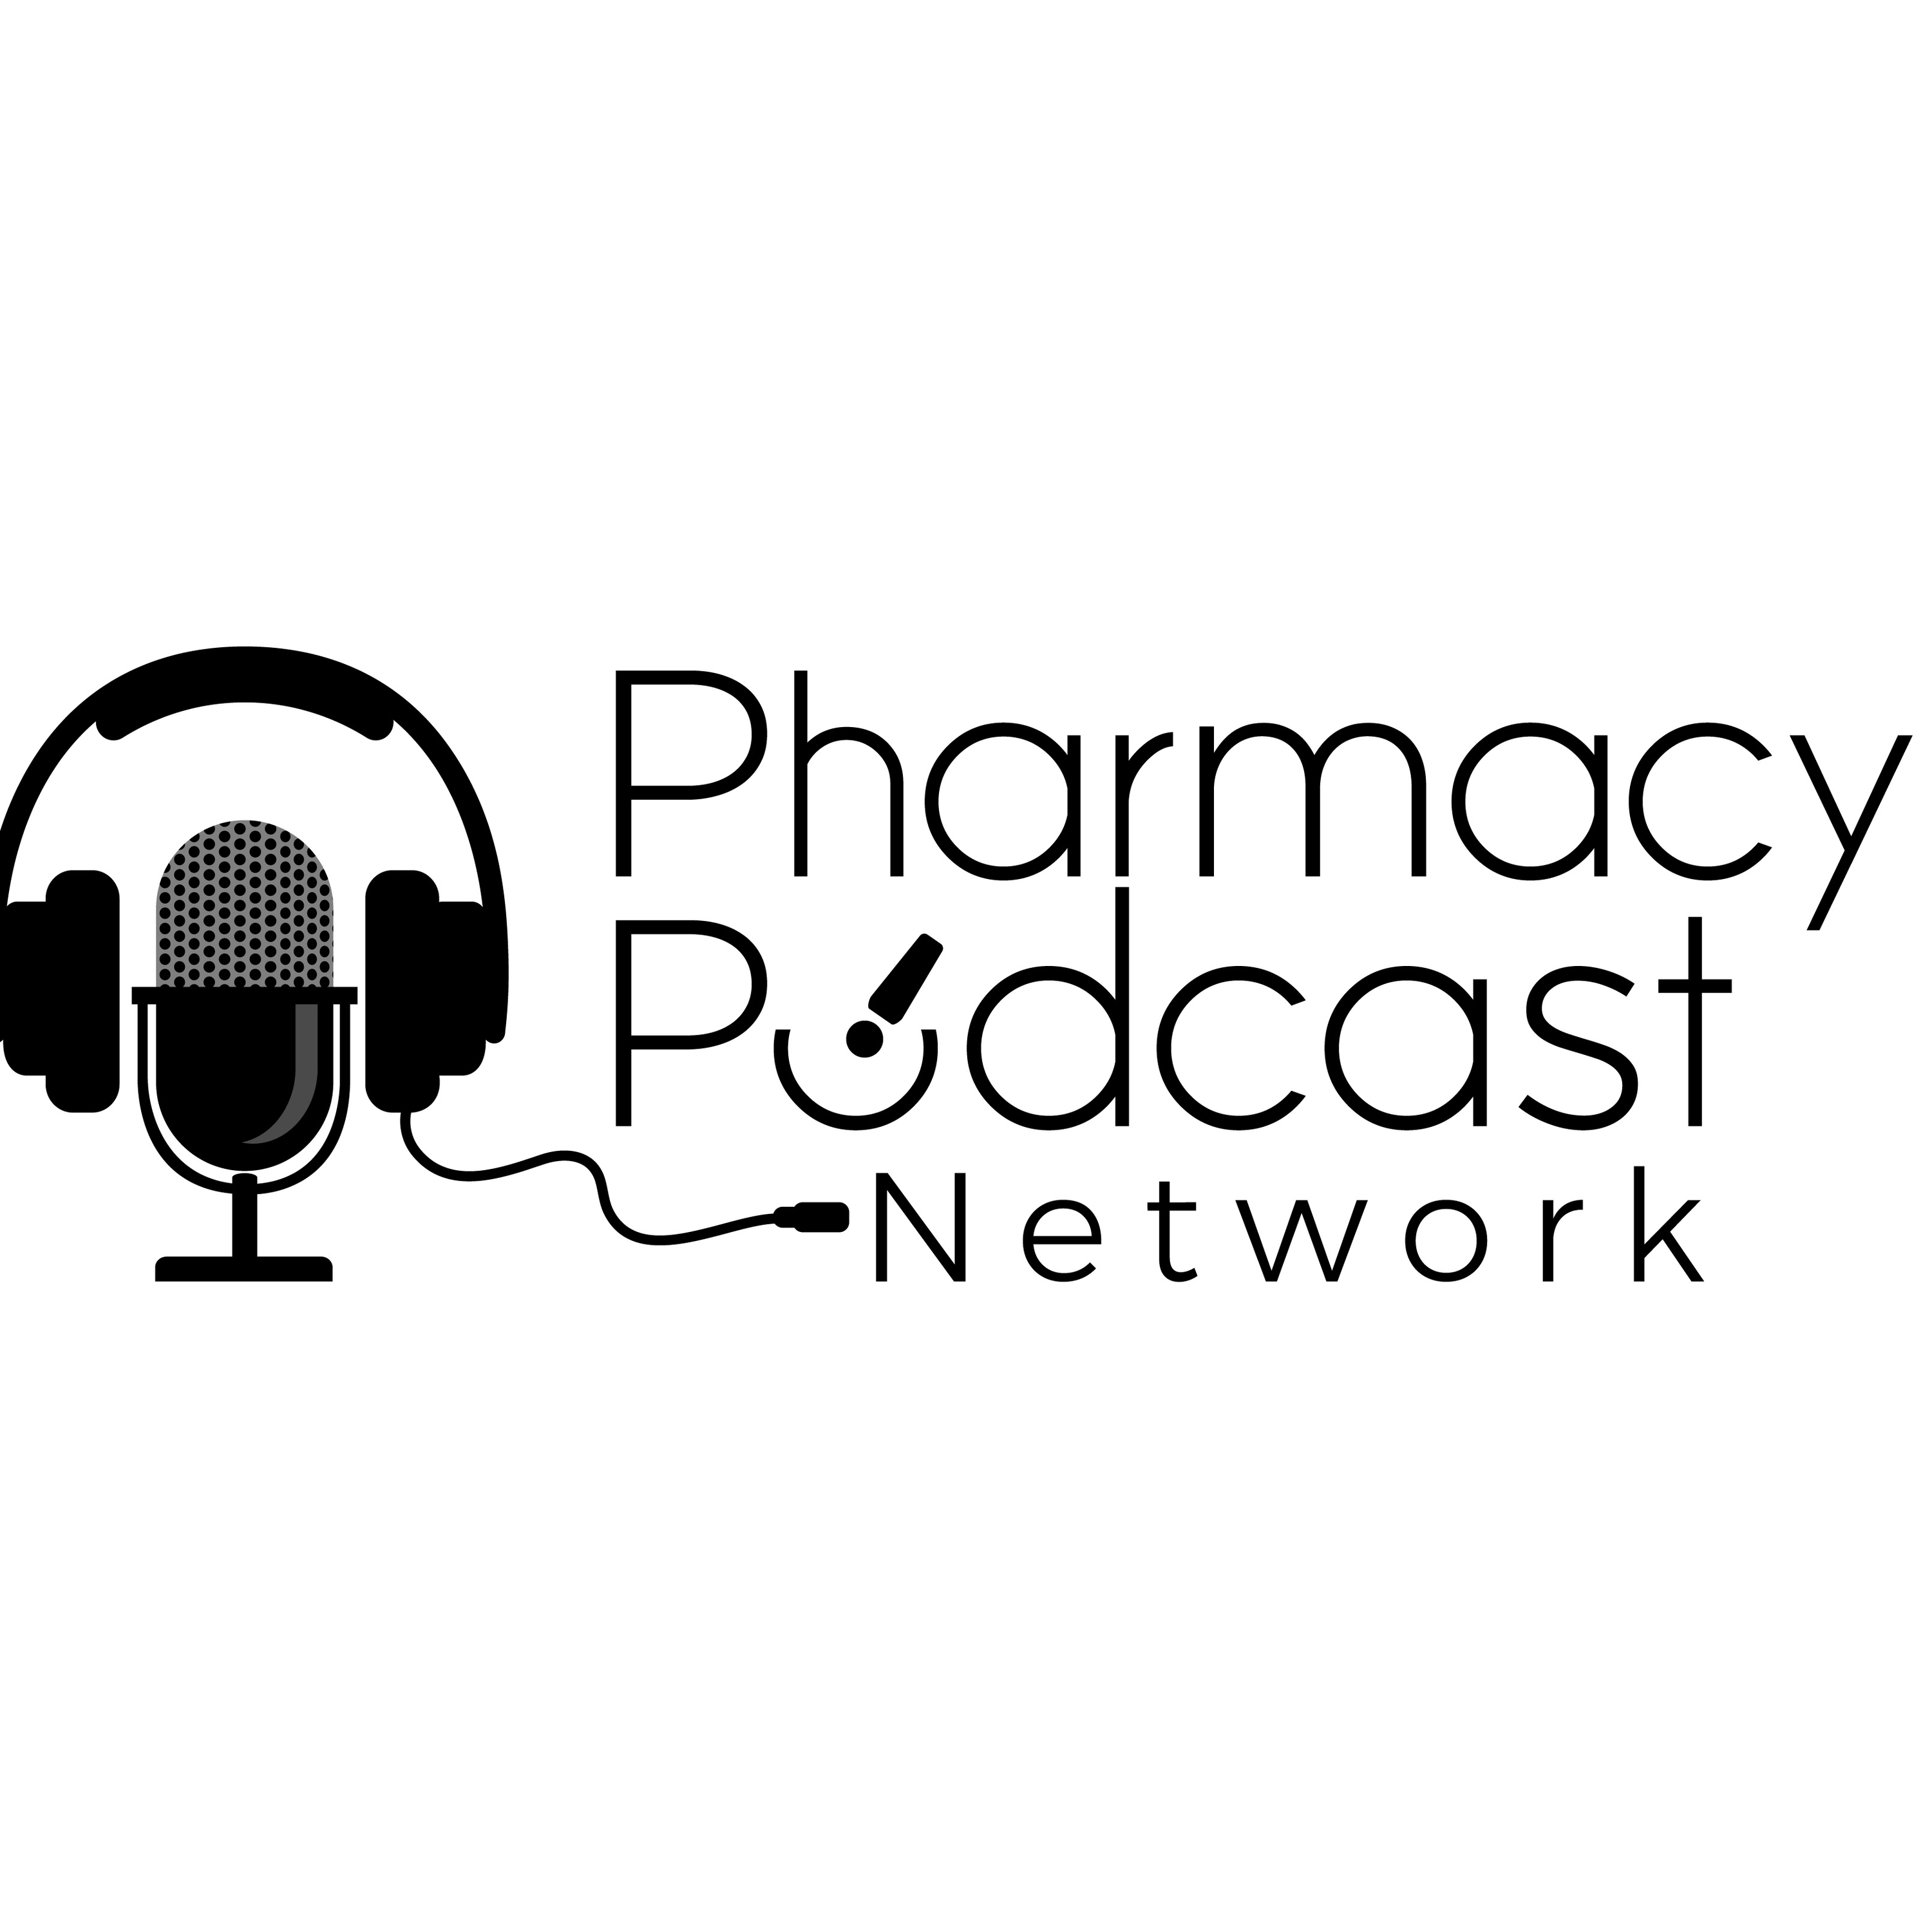 Pharmacy Future Leaders Kevin Yee - Pharmacy Podcast Episode 381